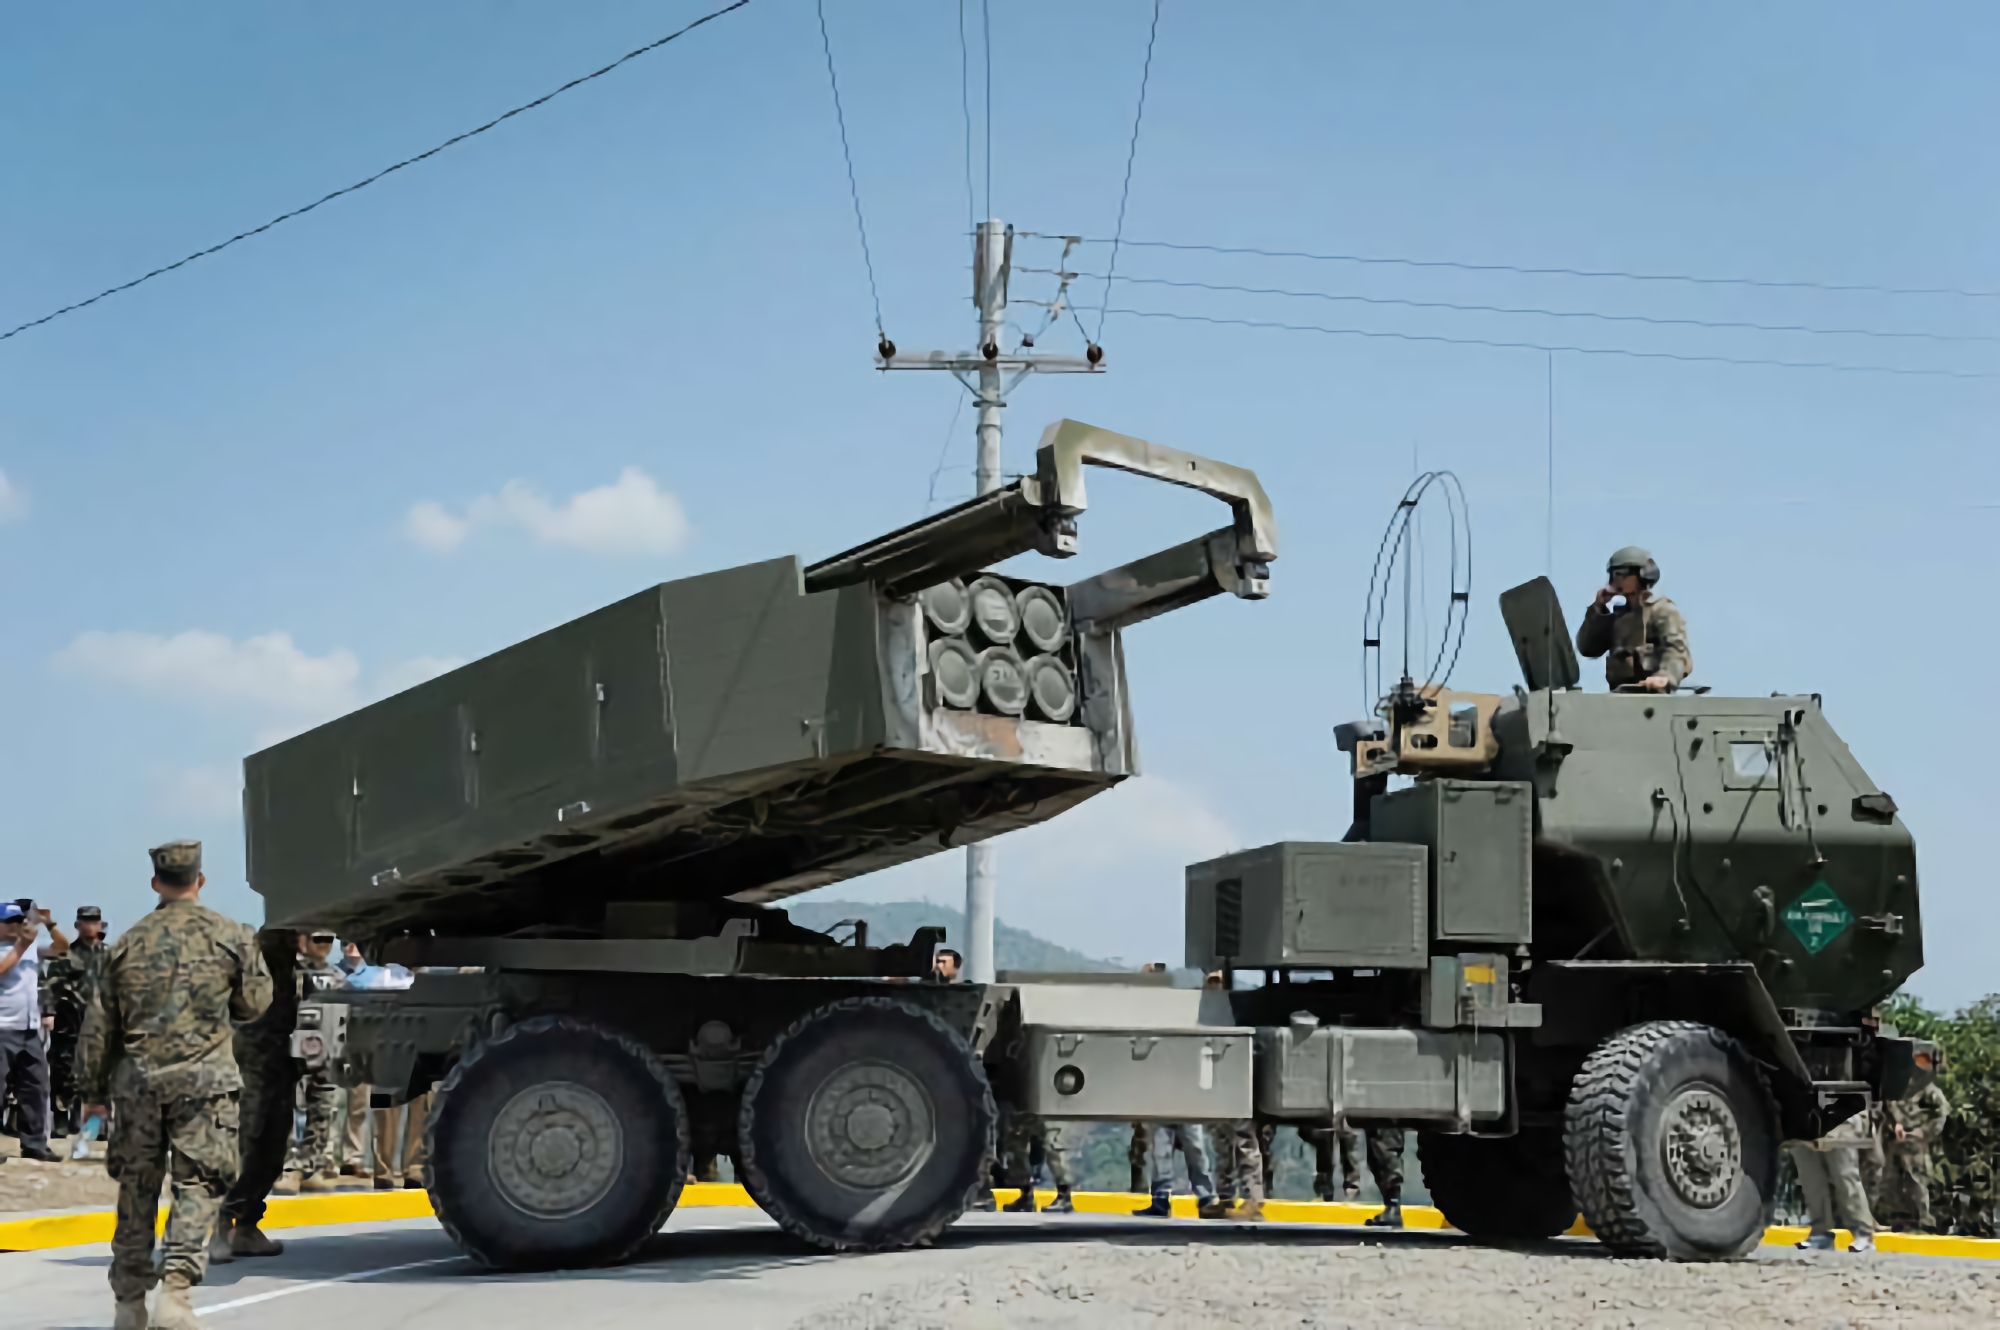 The Ukrainian Armed Forces received an additional batch of American HIMARS: there are now 20 of them in Ukraine